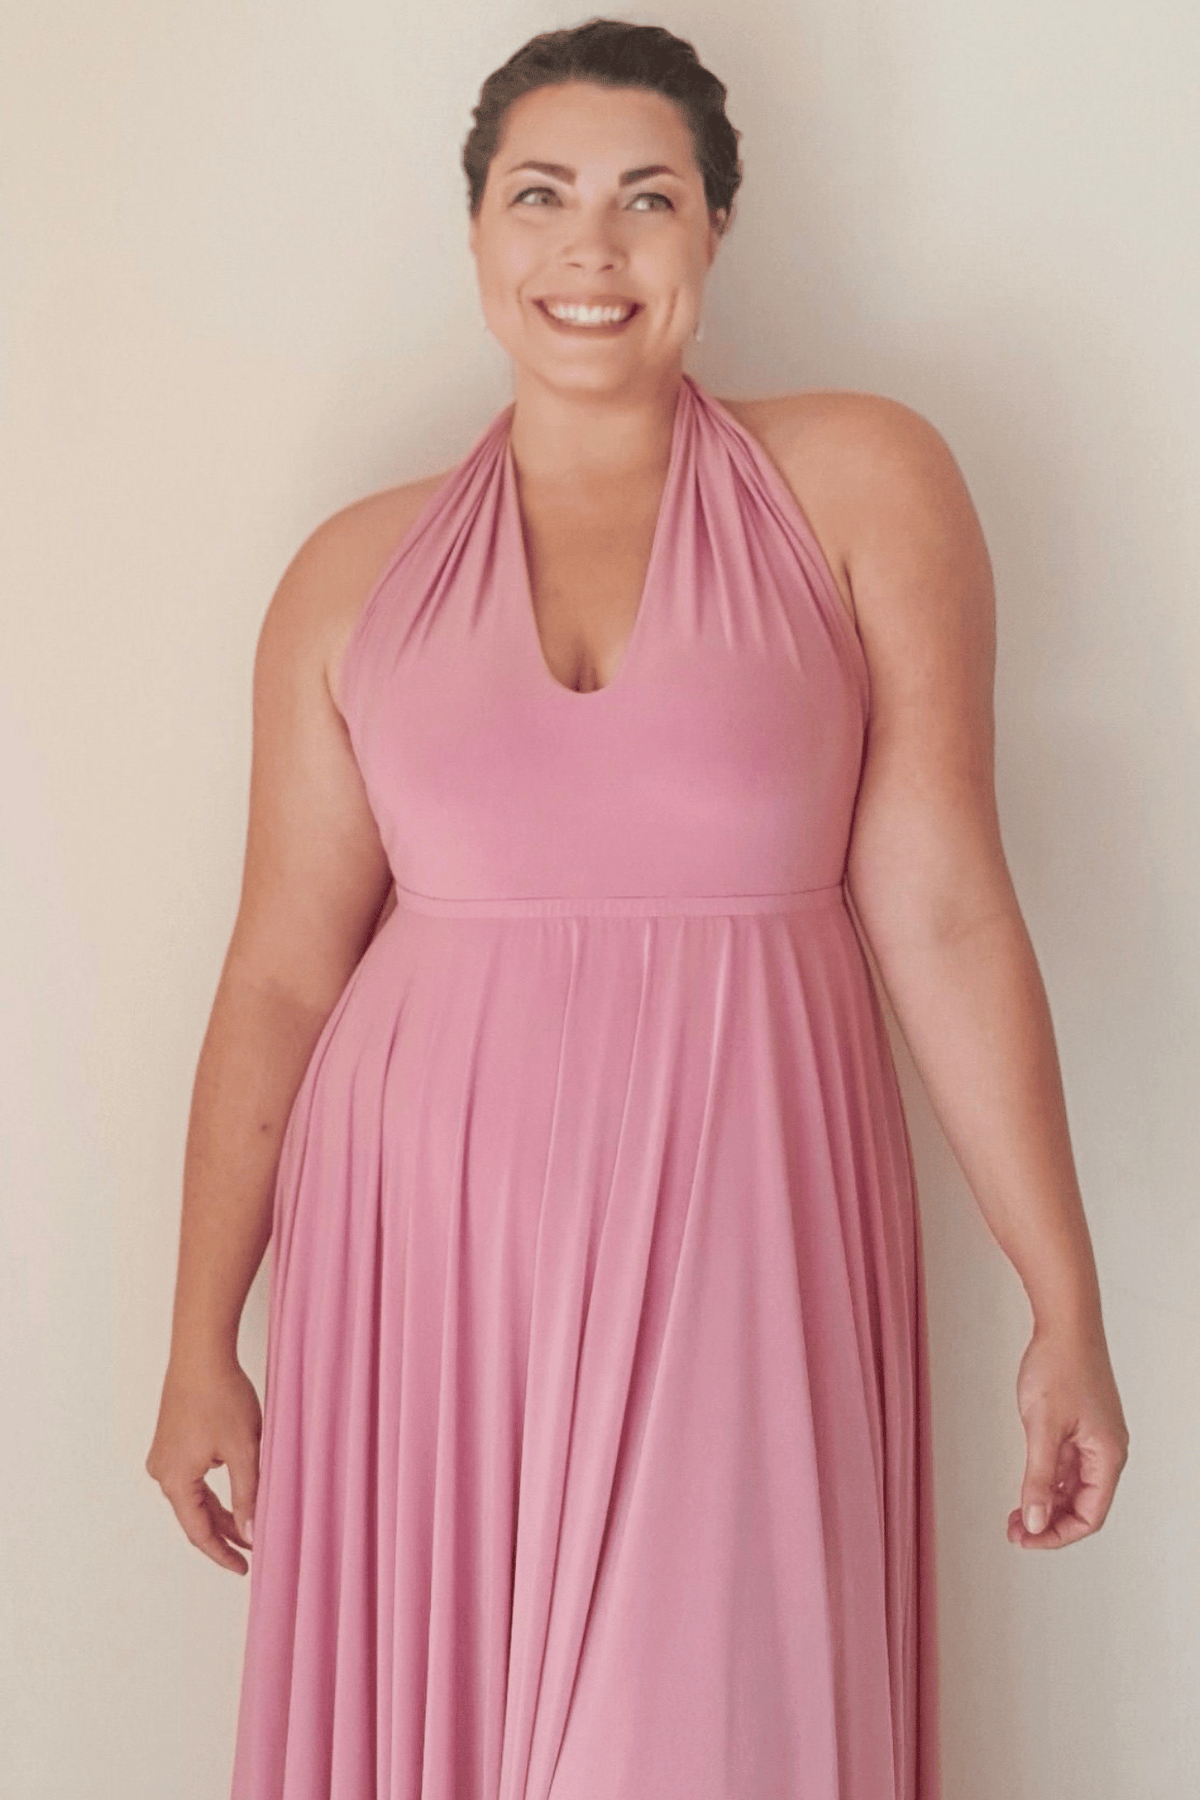 Finding Dress Bust Cup Sizes - Timeless Templates